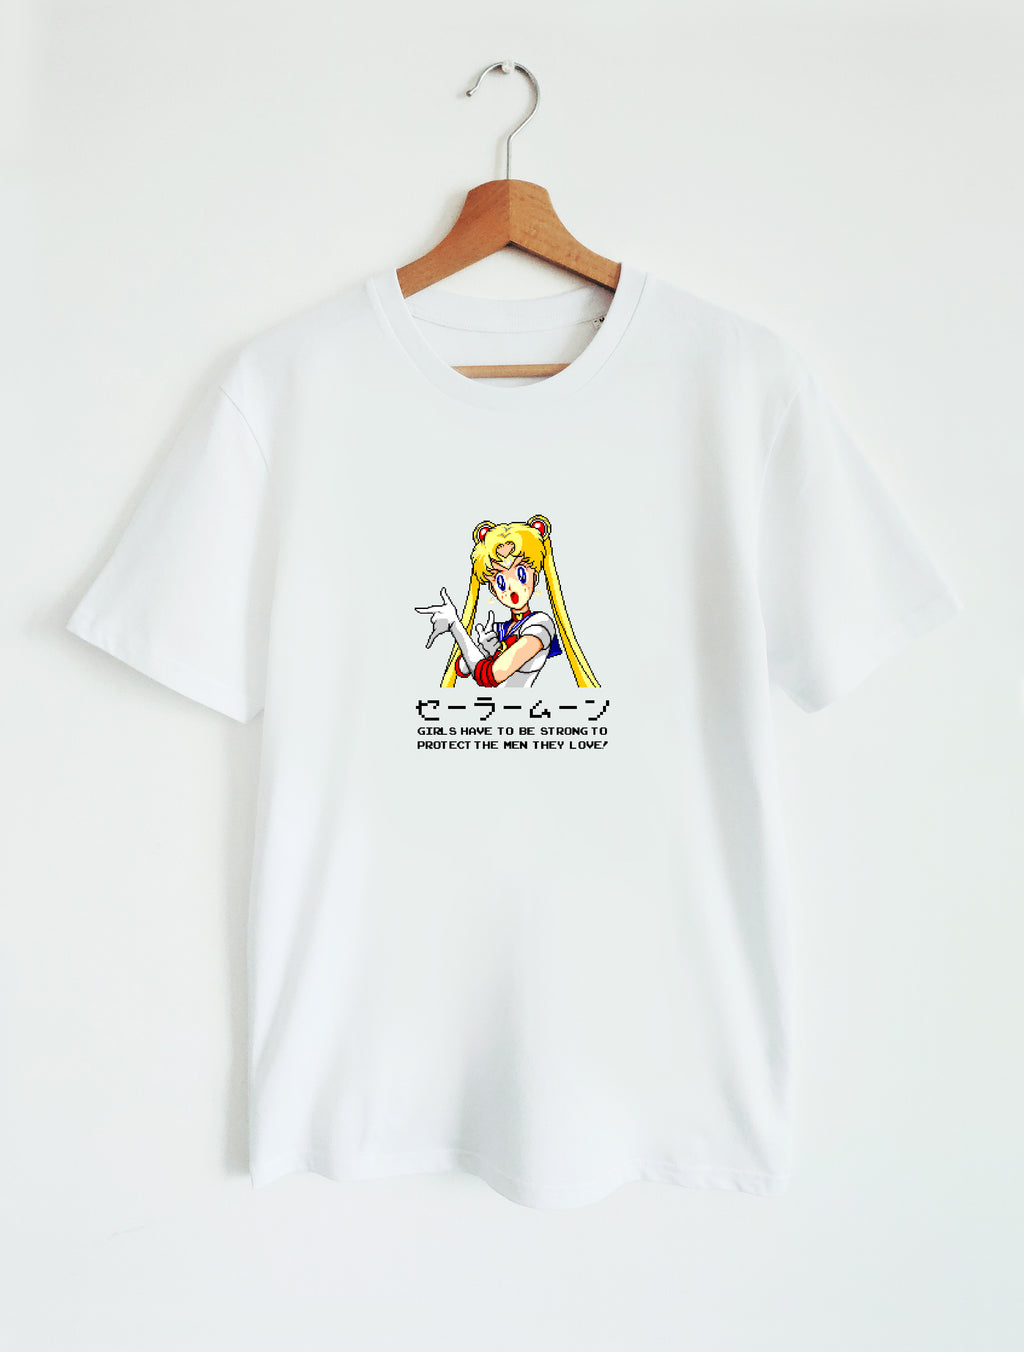 UNISEX T-SHIRT / SAILOR MOON USAGI “ GIRLS HAVE TO BE STRONG”